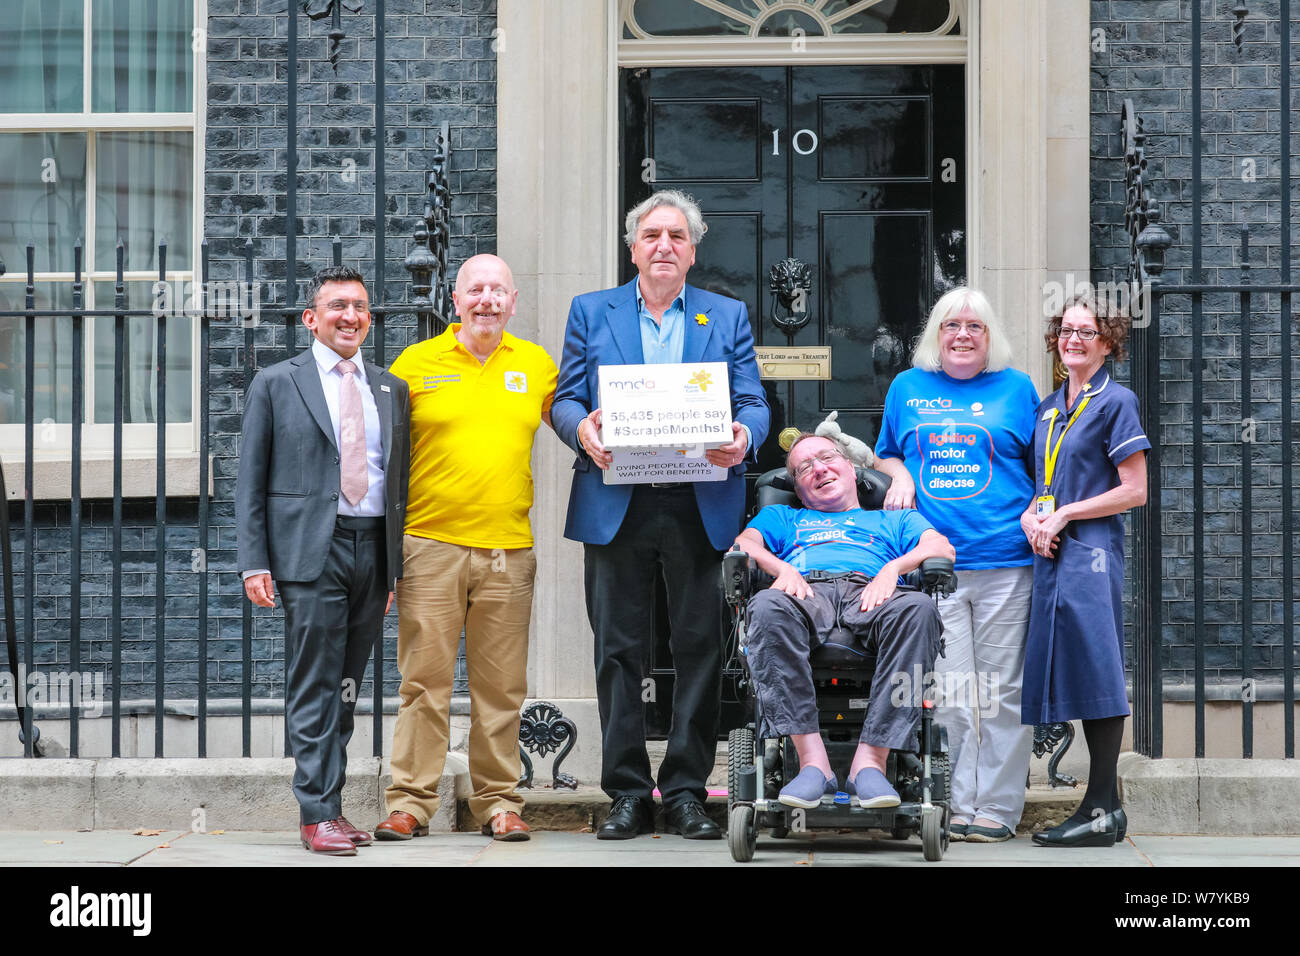 Downing Street, London, UK, 07th Aug 2019. Actor Jim Carter (Downton Abbey's Mr. Carson) hands in a petition at No 10 Downing Street, together with charity workers and carers. The petition, called 'Scrap 6 Months' on behalf of the Marie Curie and Motor Neurone Disease Association is for terminally ill patients to have faster access to fast track higher rate benefits. Credit: Imageplotter/Alamy Live News Stock Photo